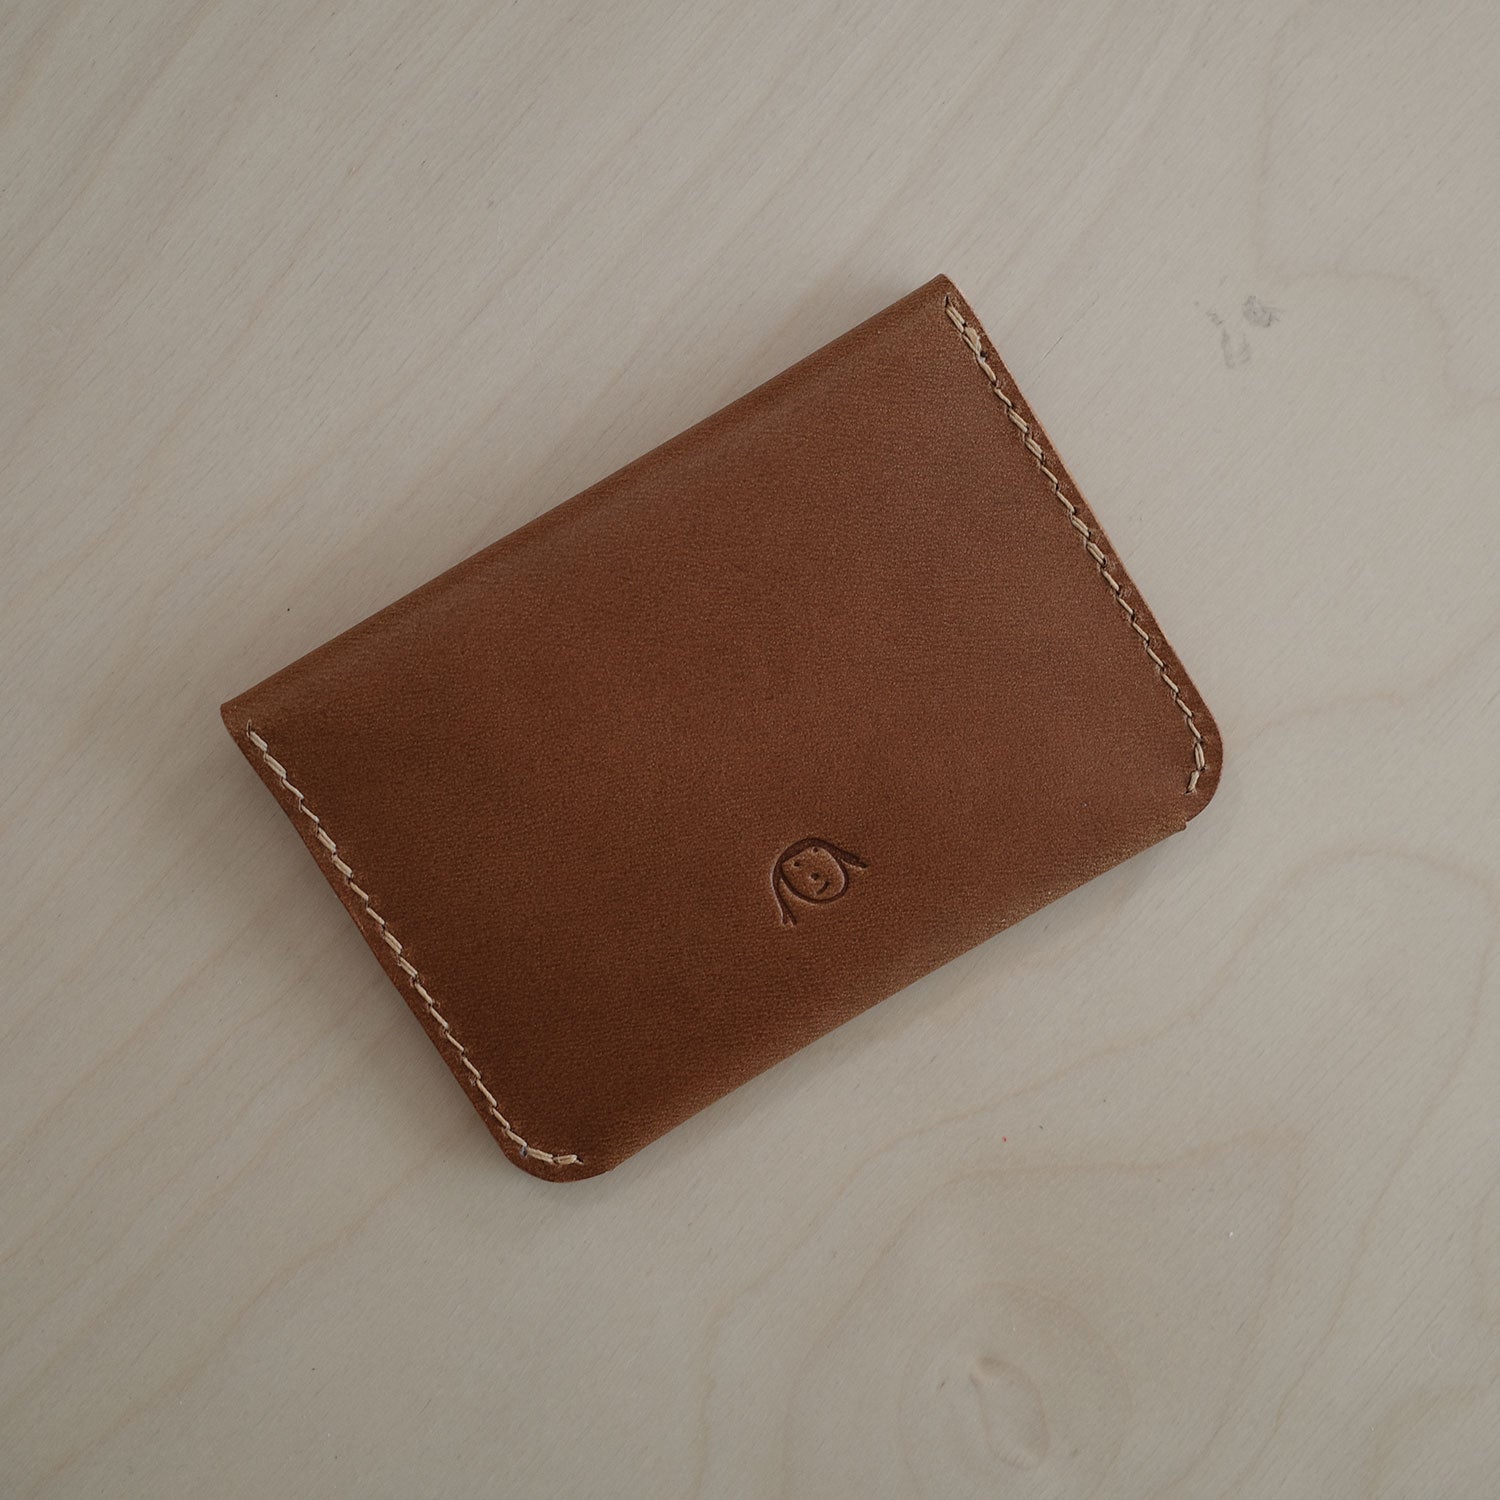 Slide Card Pouch